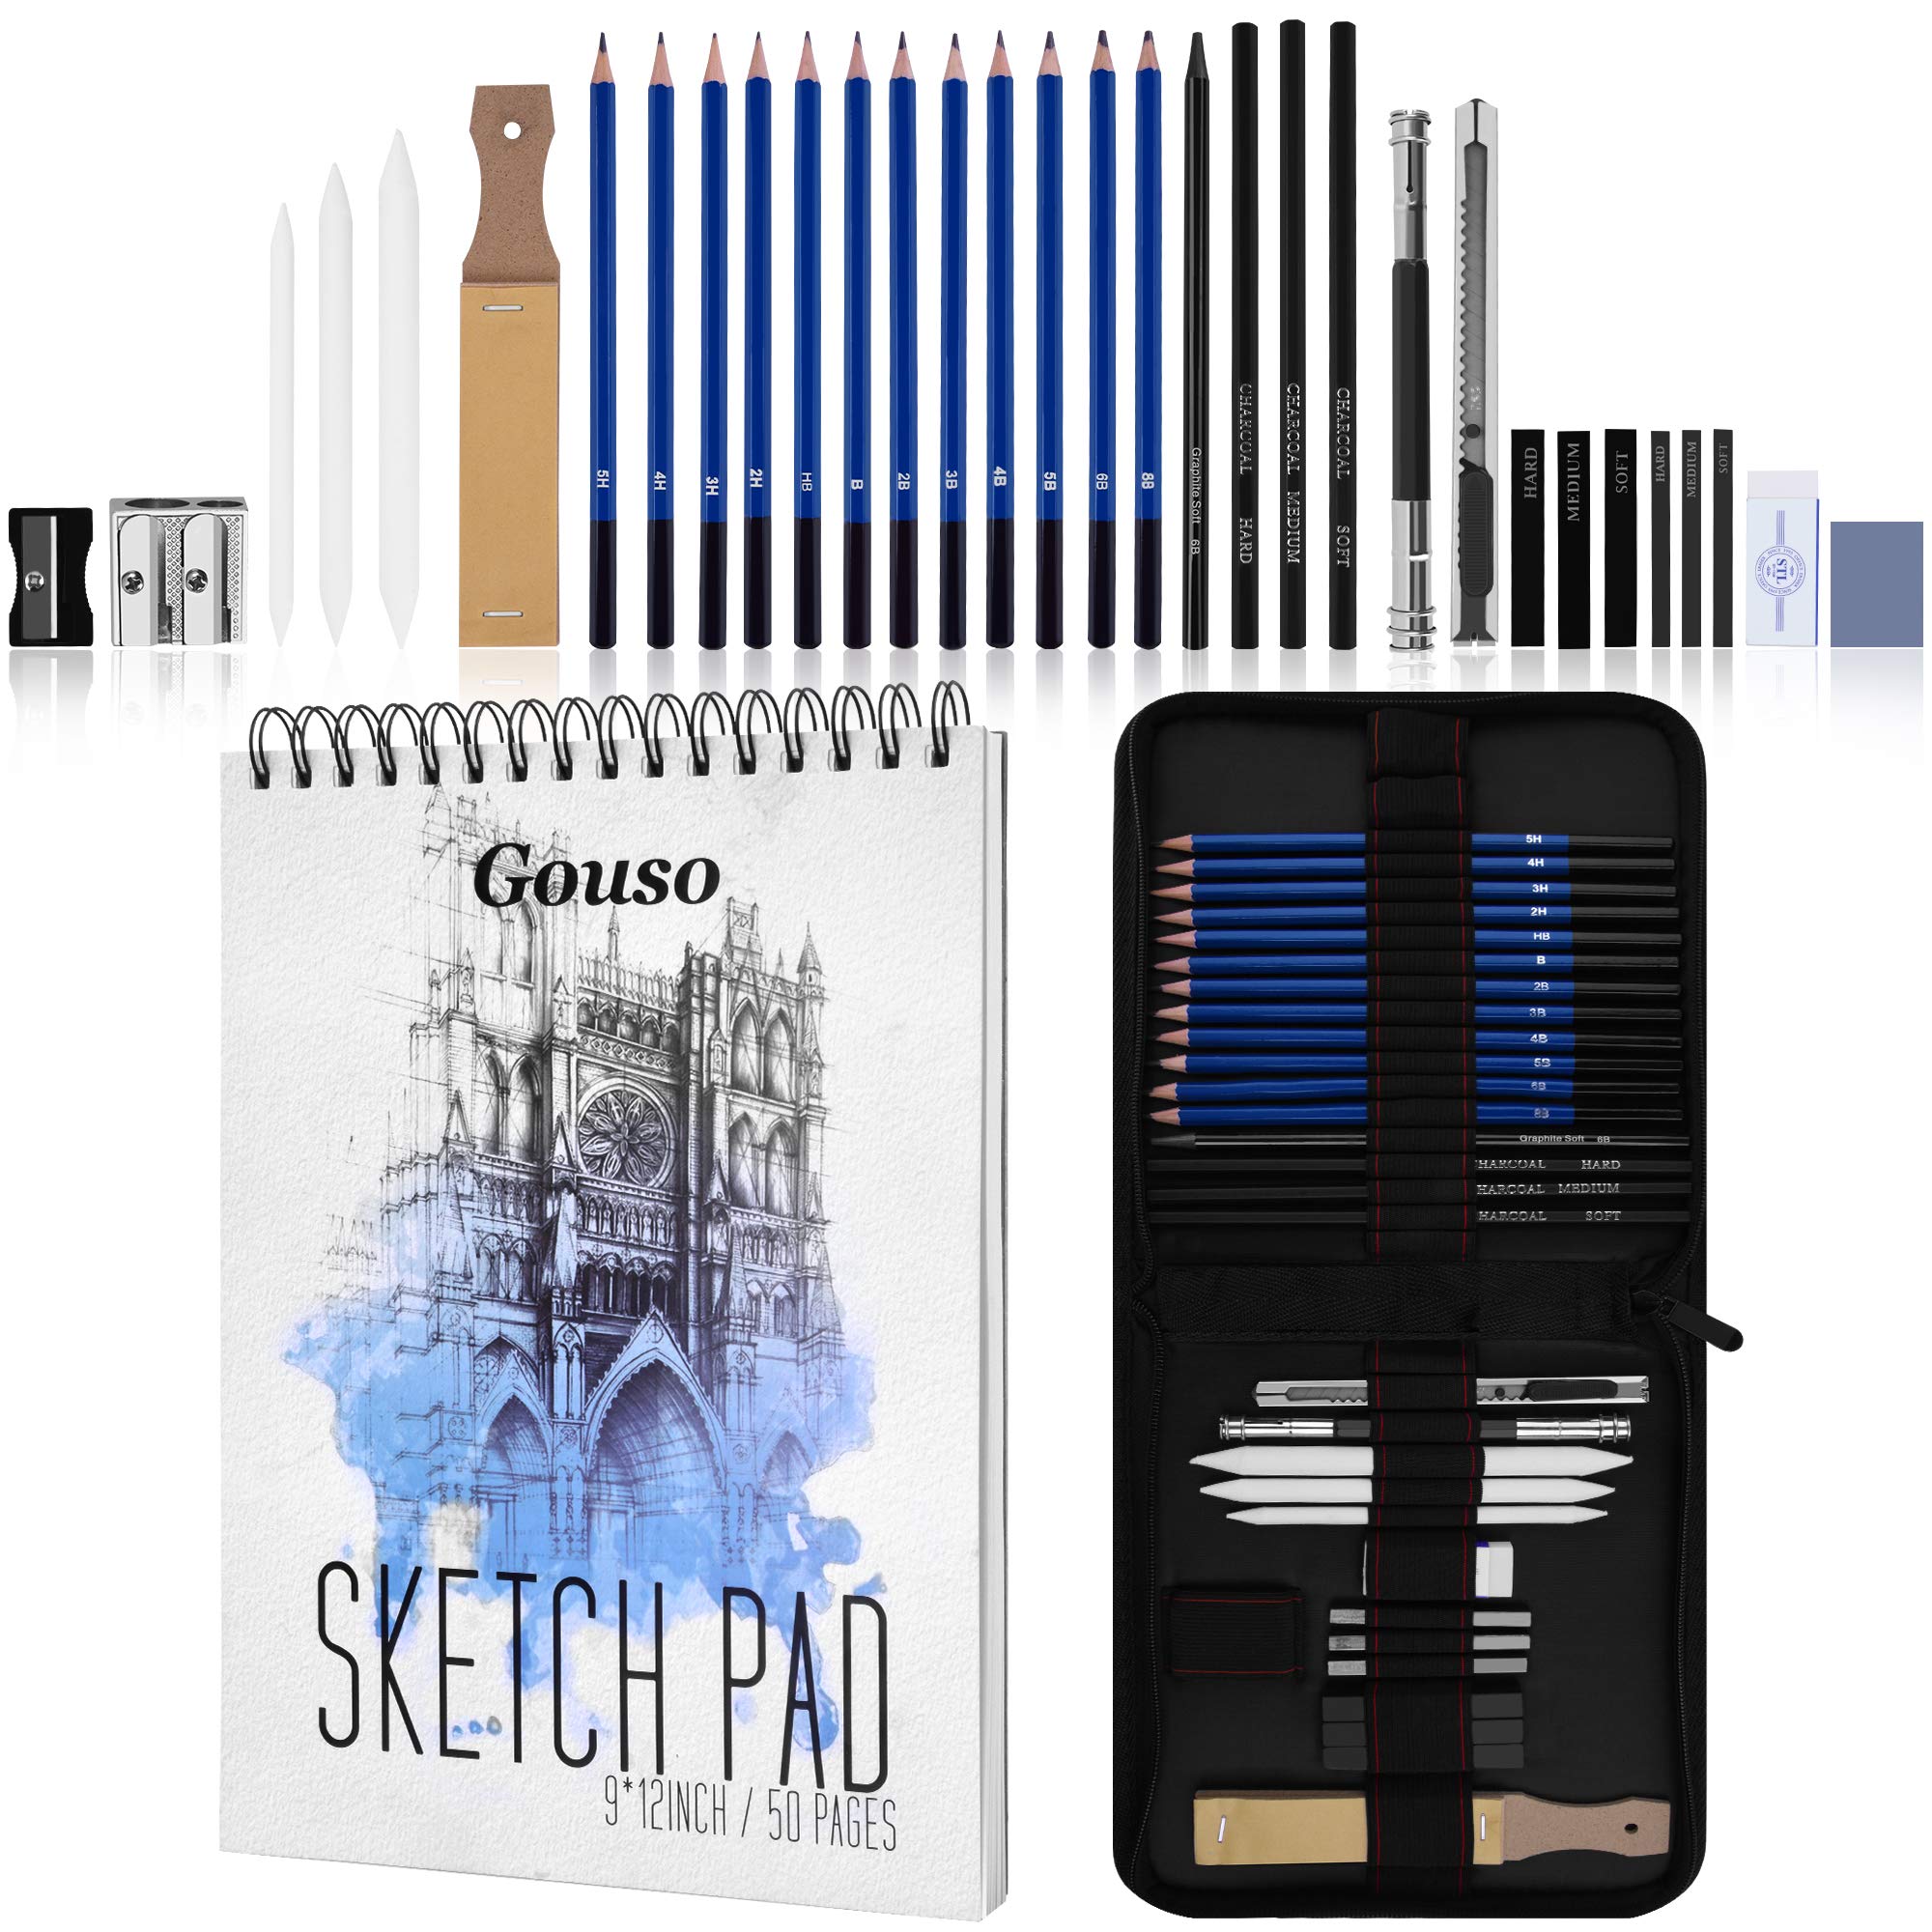  AUREUO Drawing Set - Pencil Set for Sketching and Drawing with  5.5x8.5'' Small Sketch Pad (60 Sheets) Graphite Pencils, Kneaded Eraser -  Art Kit & Supplies for Kids, Students, Adults